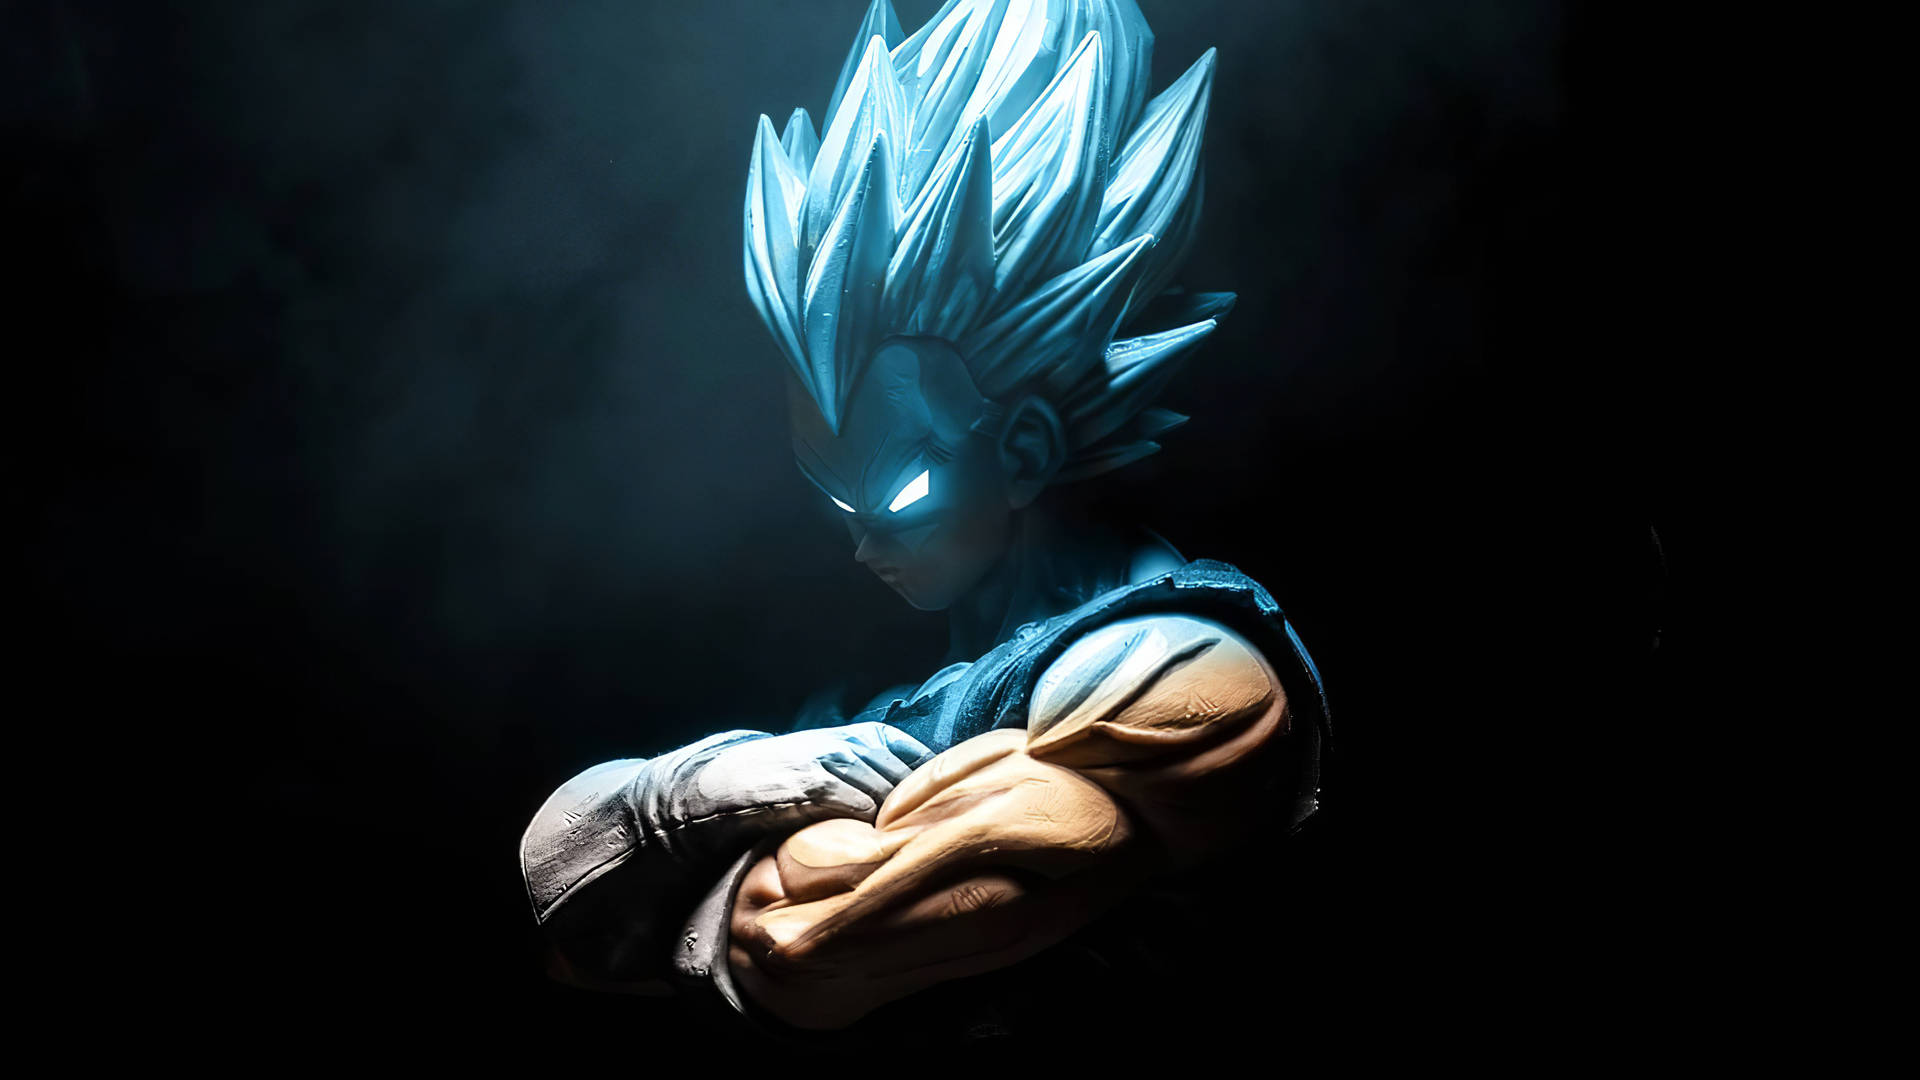 Goku 4K wallpapers for your desktop or mobile screen free and easy to  download